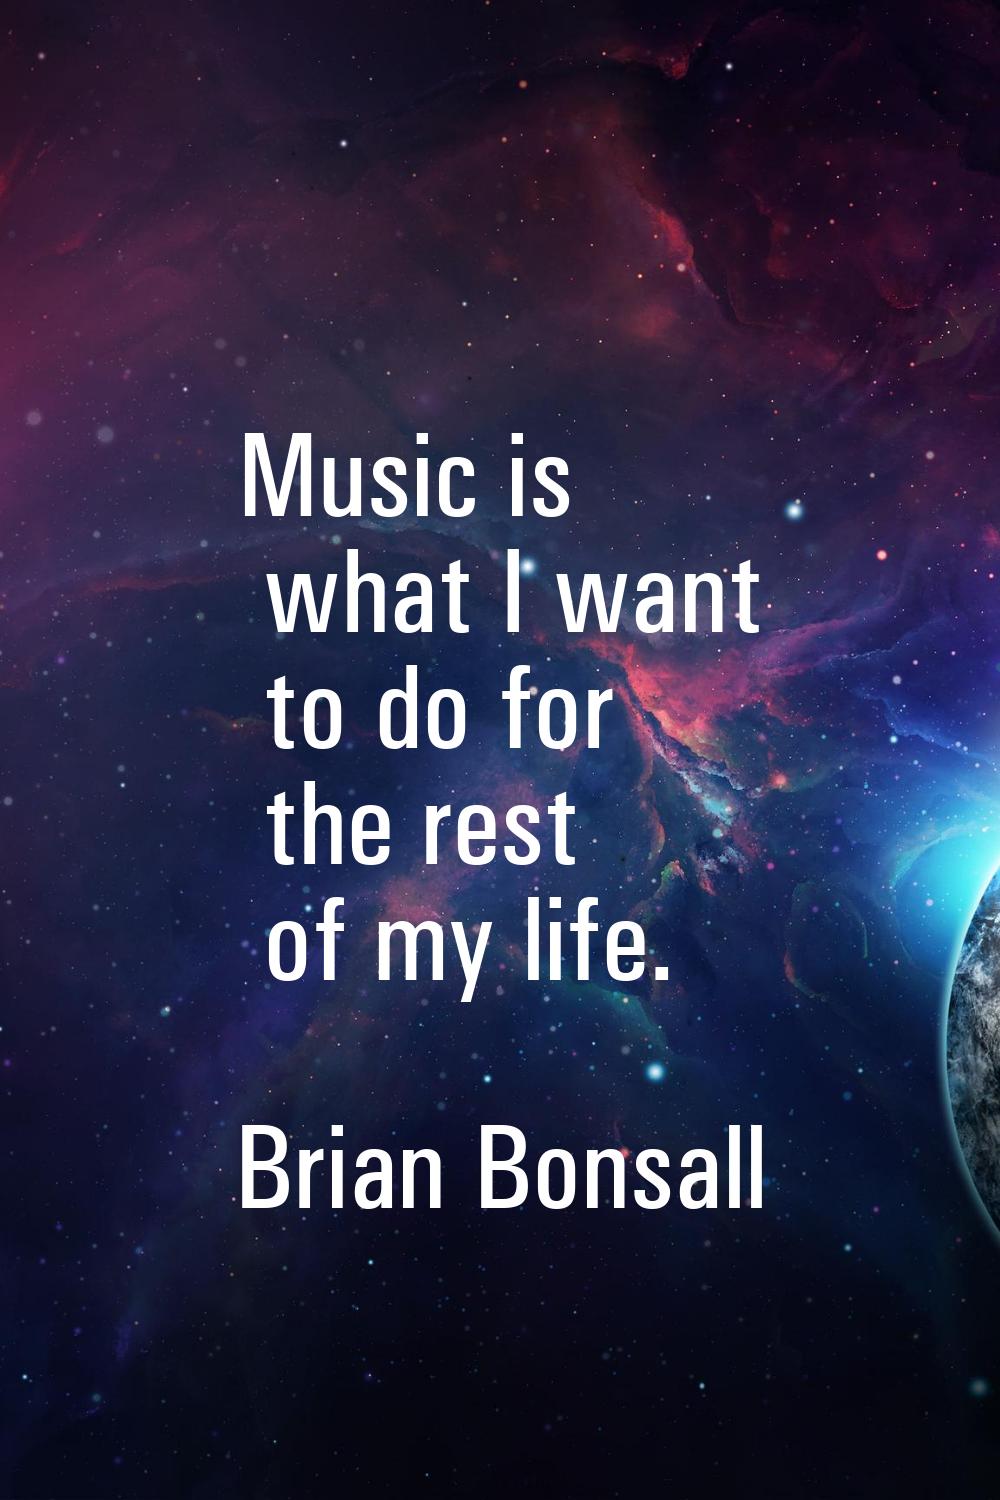 Music is what I want to do for the rest of my life.